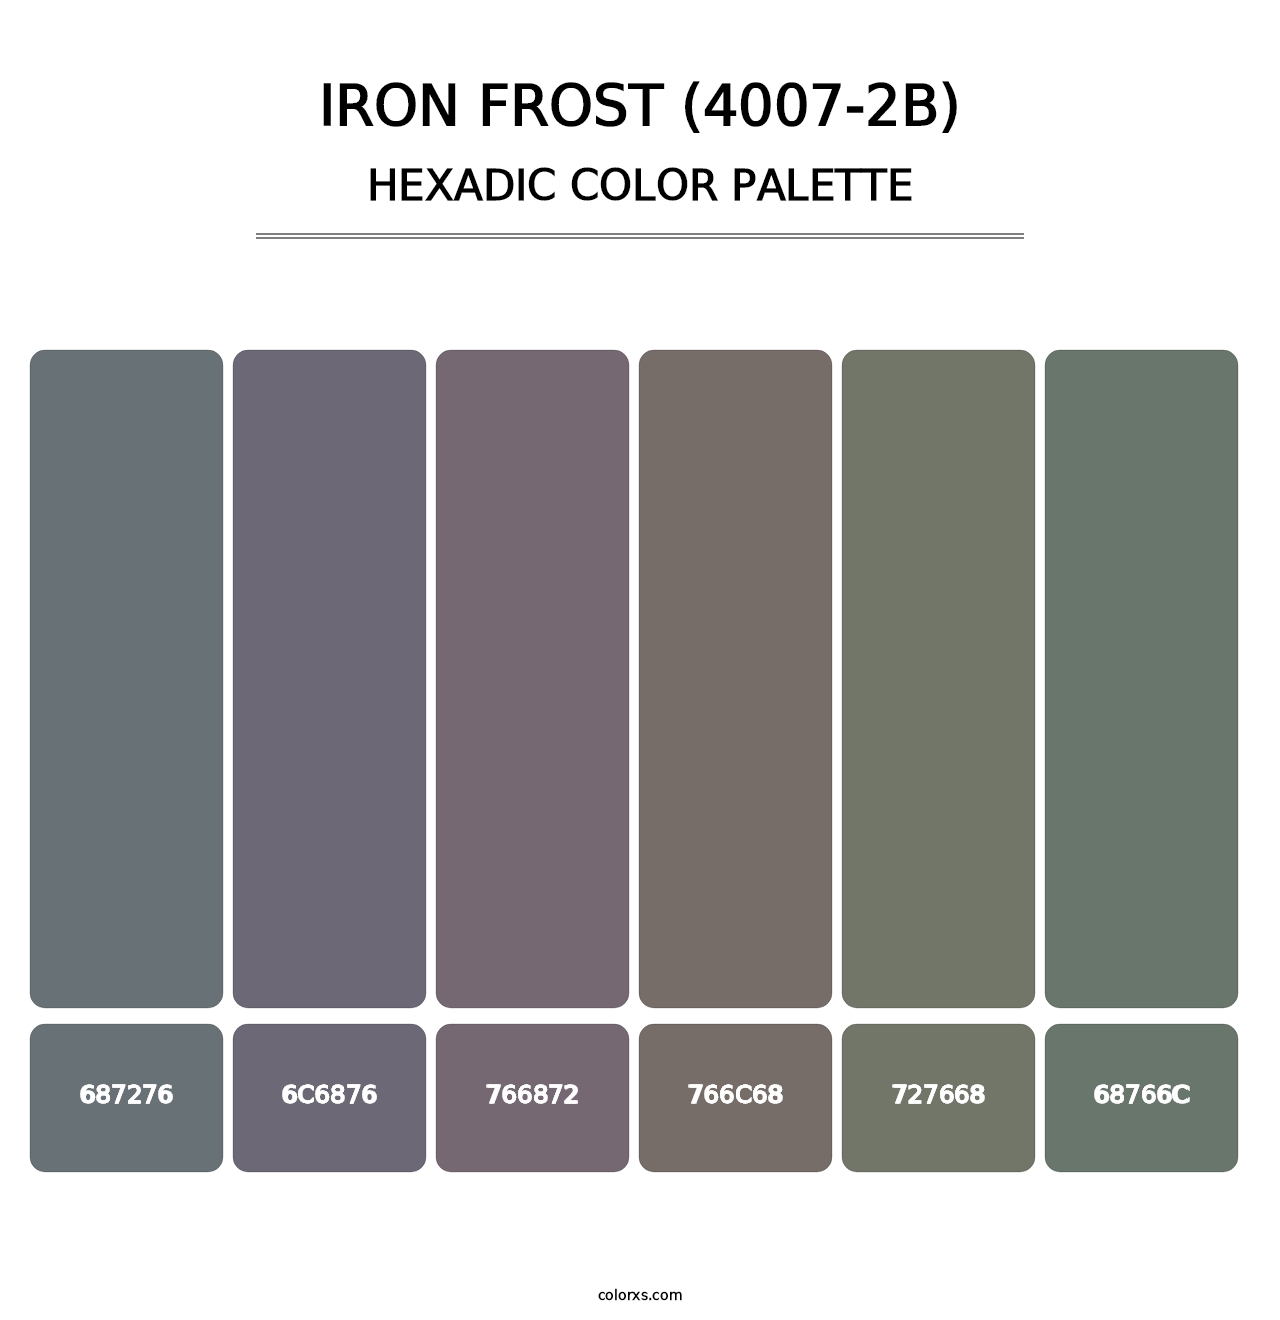 Iron Frost (4007-2B) - Hexadic Color Palette